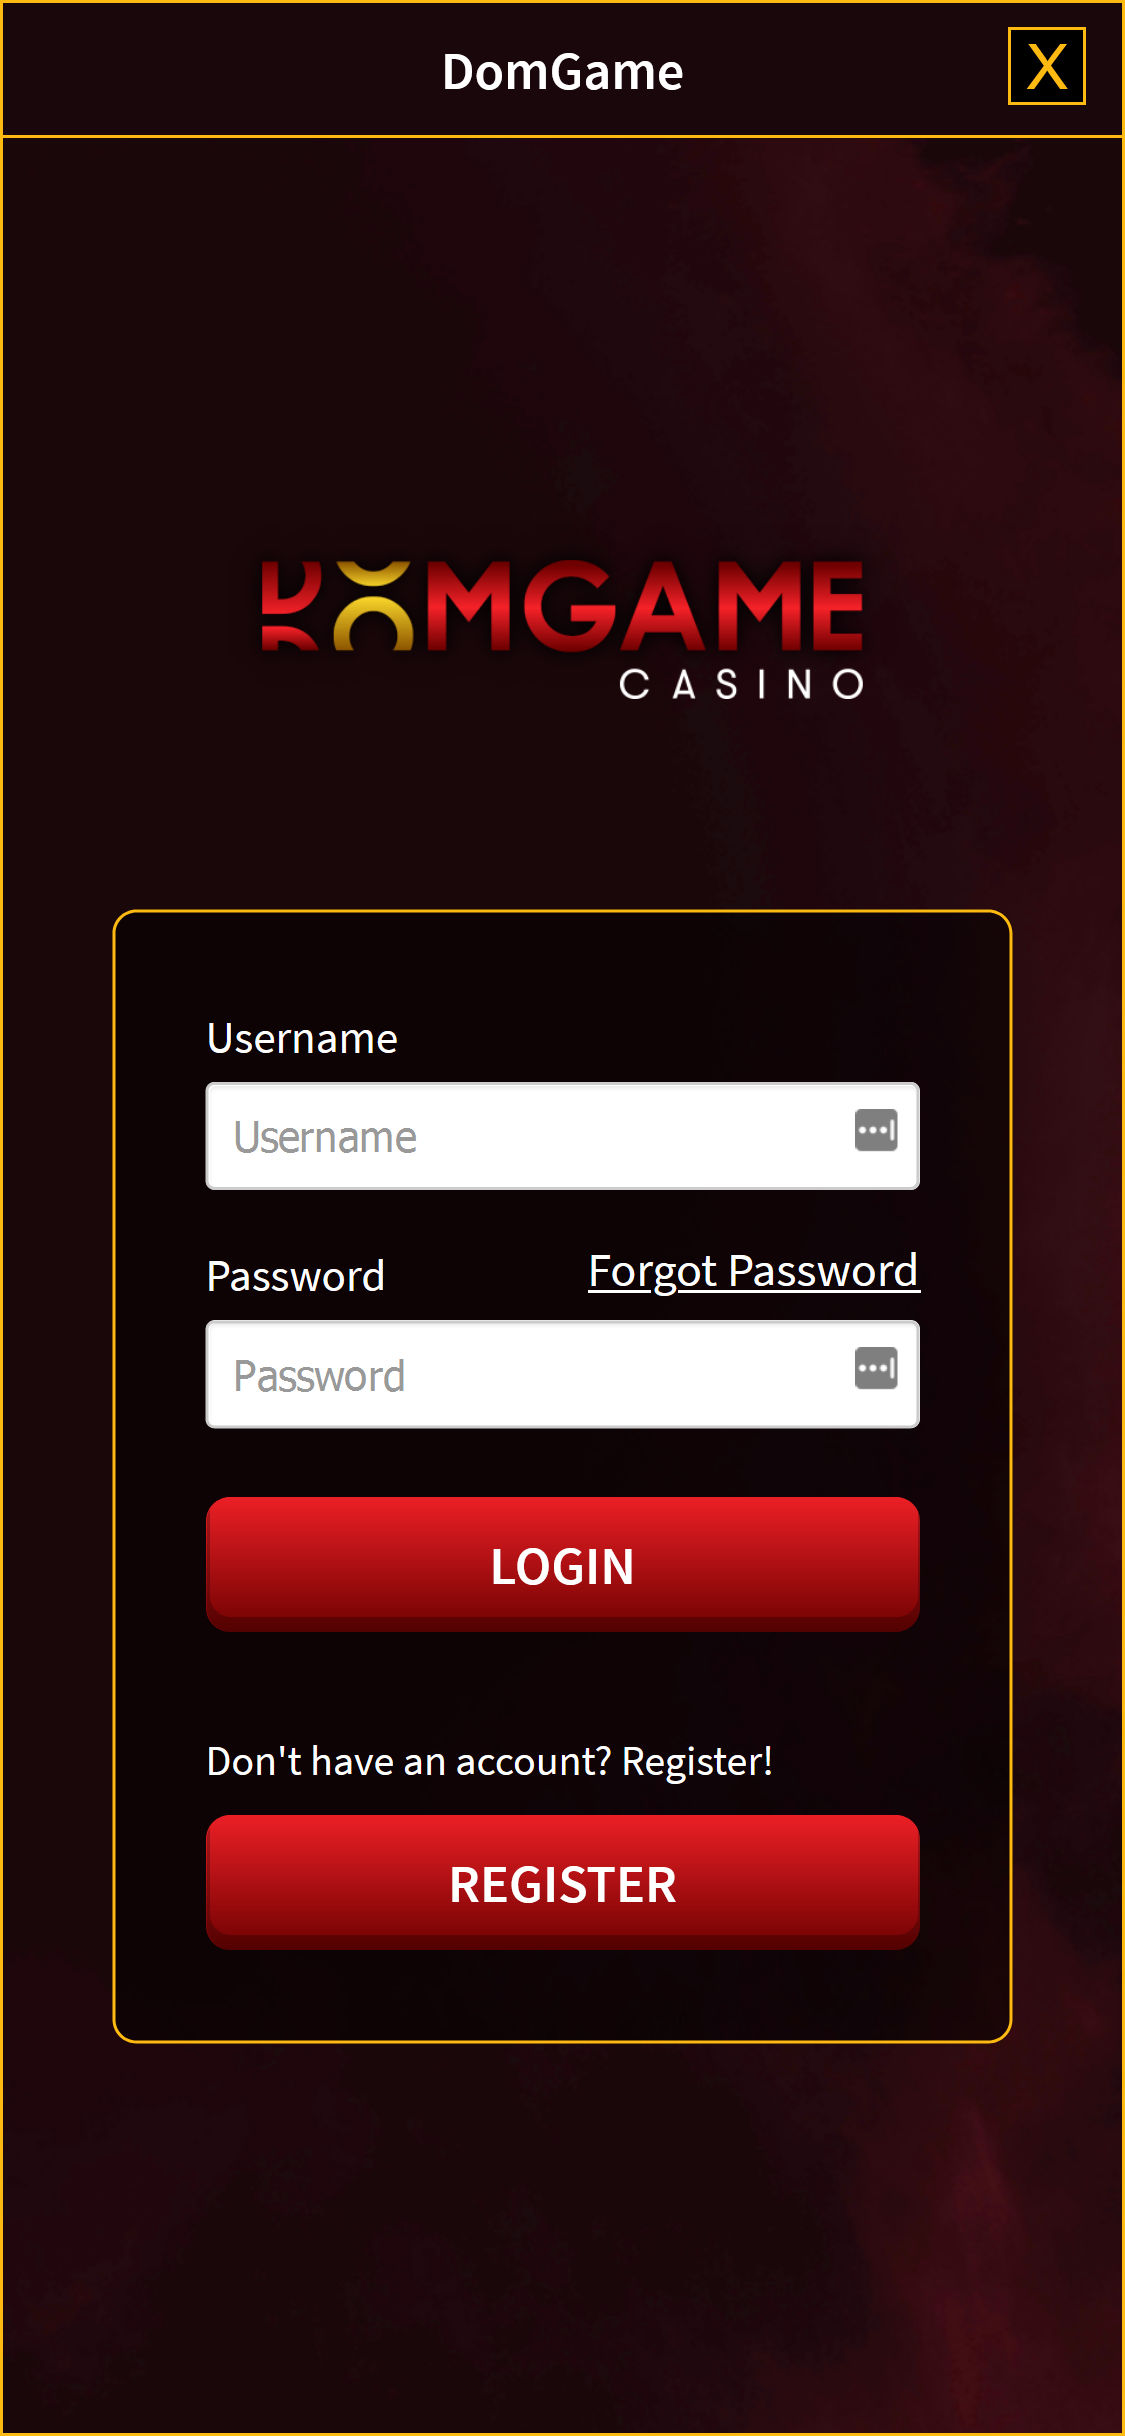 DomGame Casino Mobile Login Review